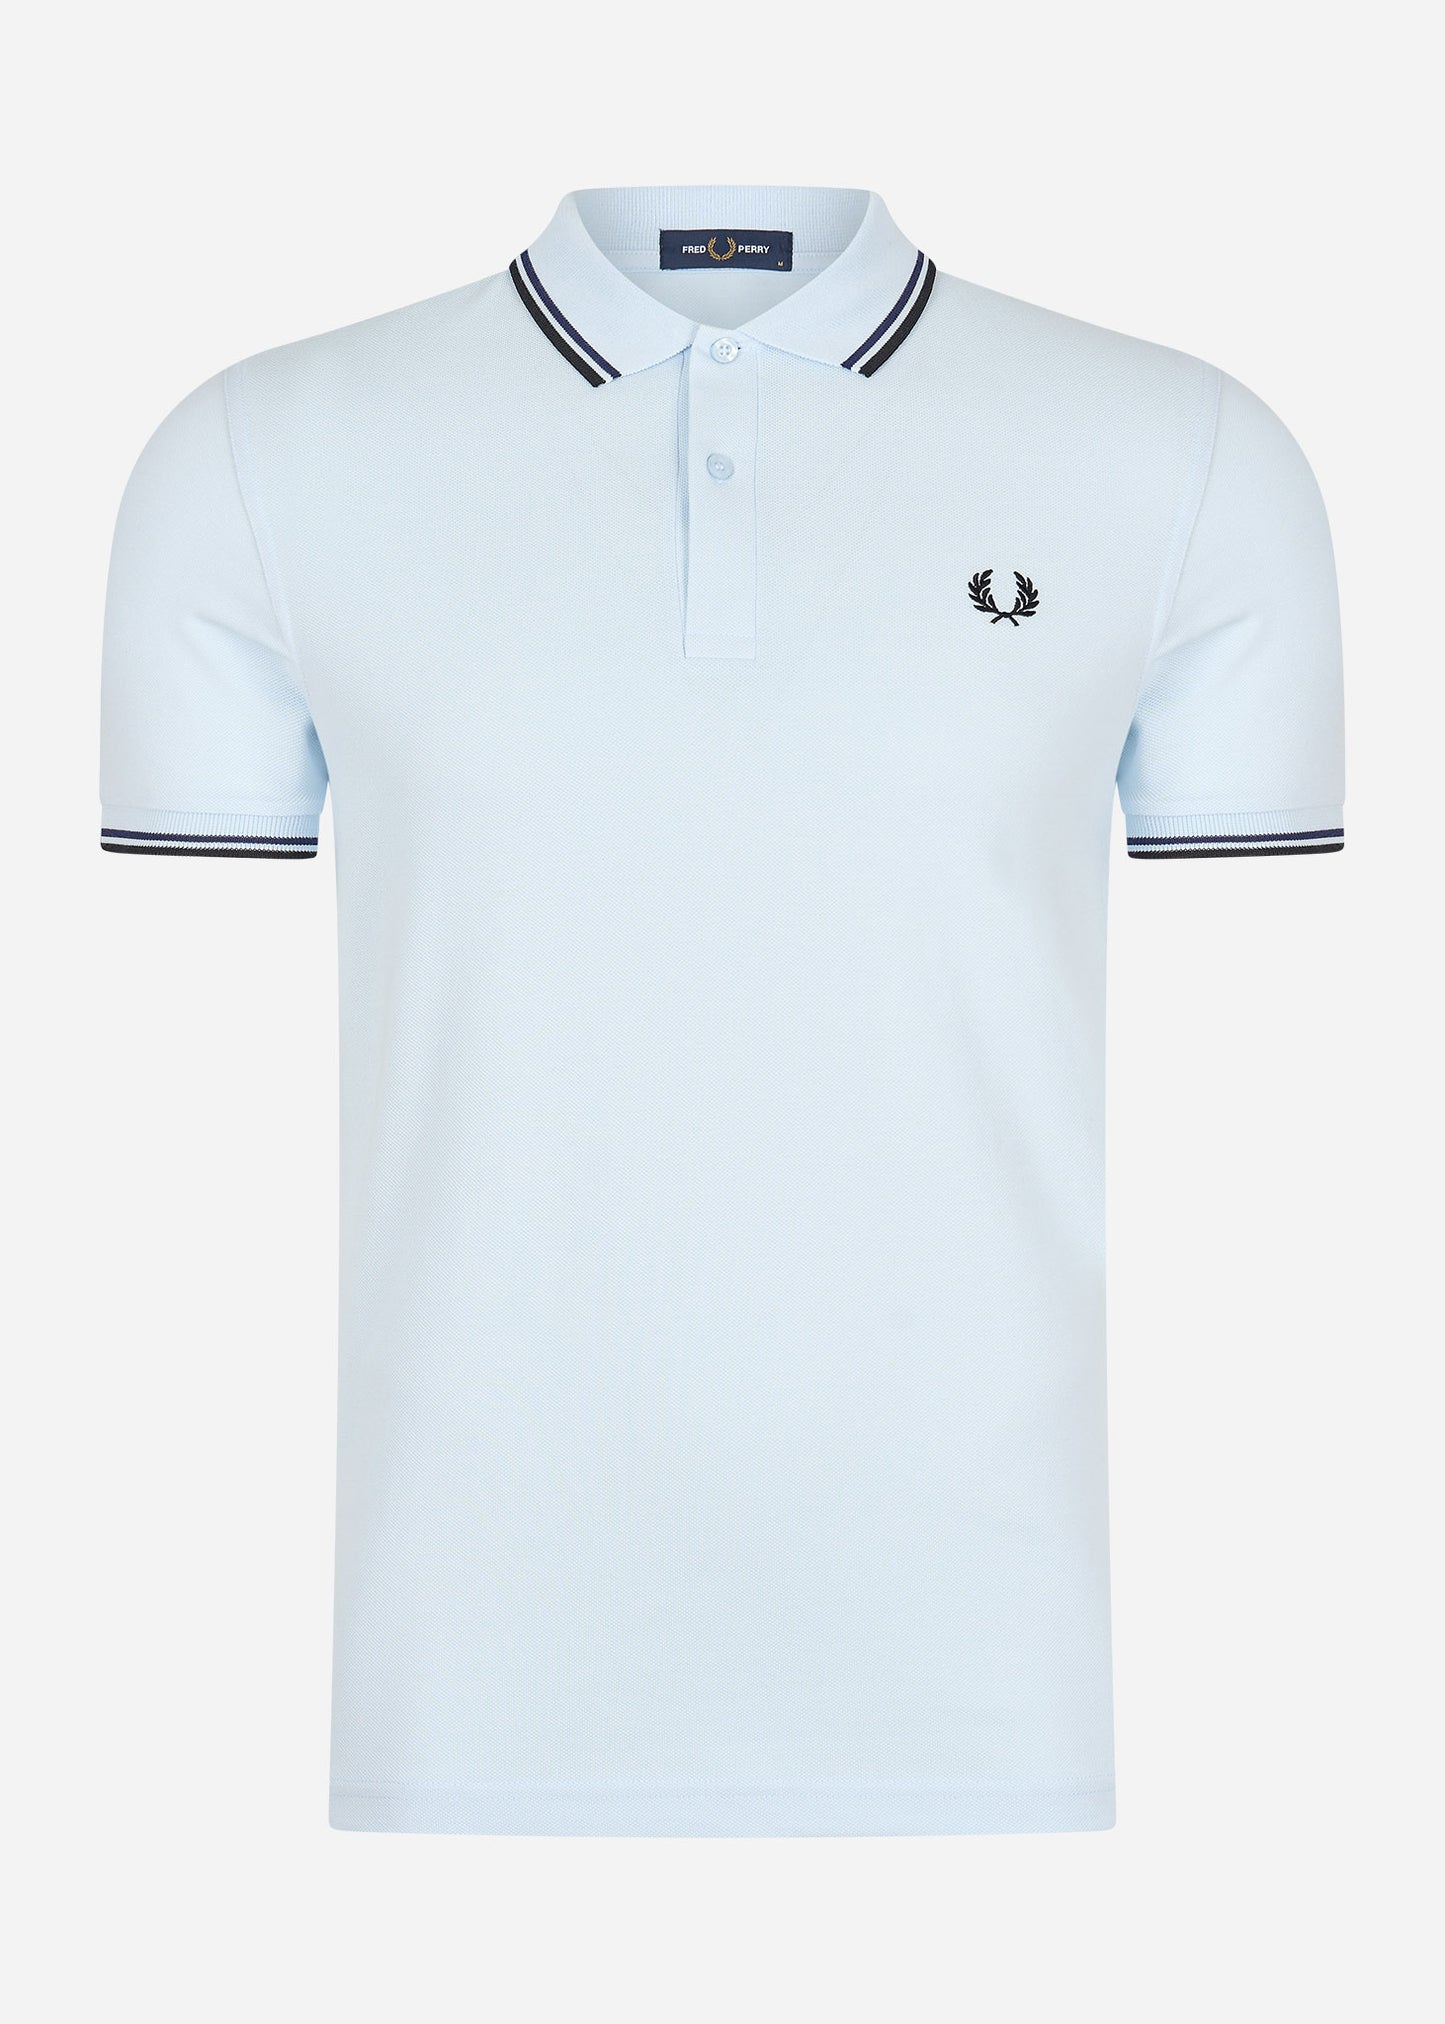 Twin tipped fred perry shirt - light ice